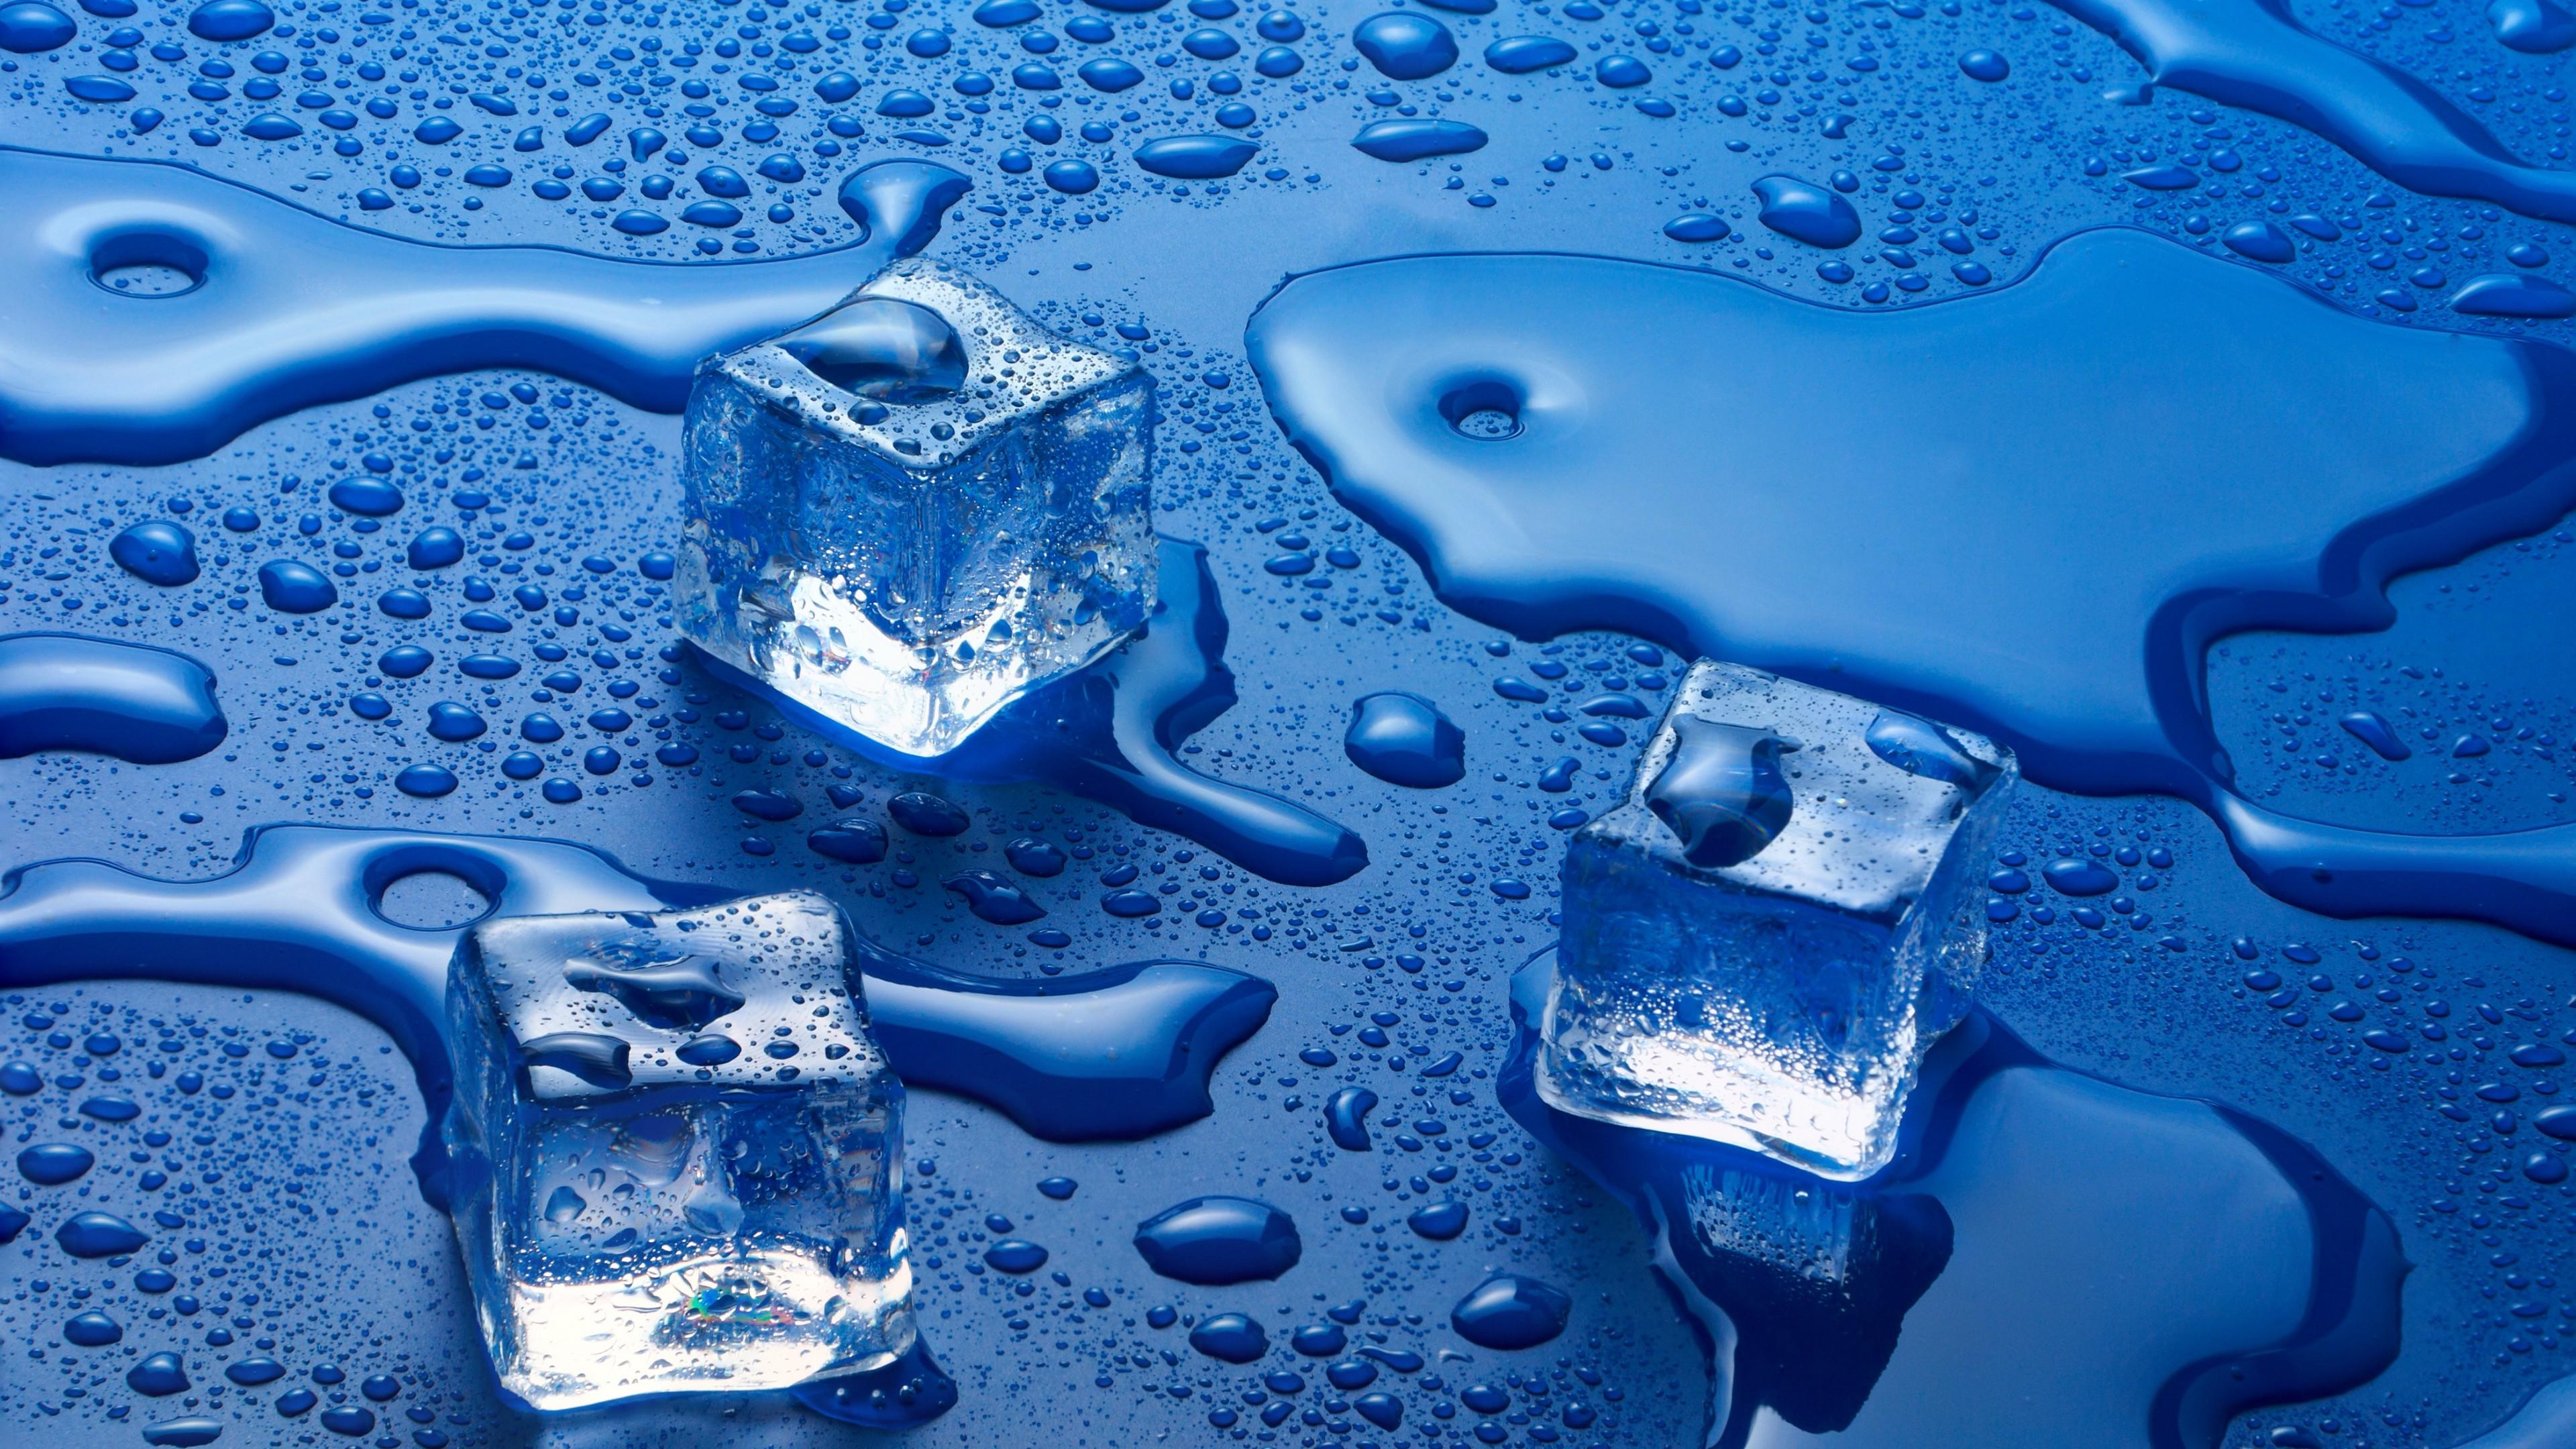 Melting ice cubes wallpaper - backiee